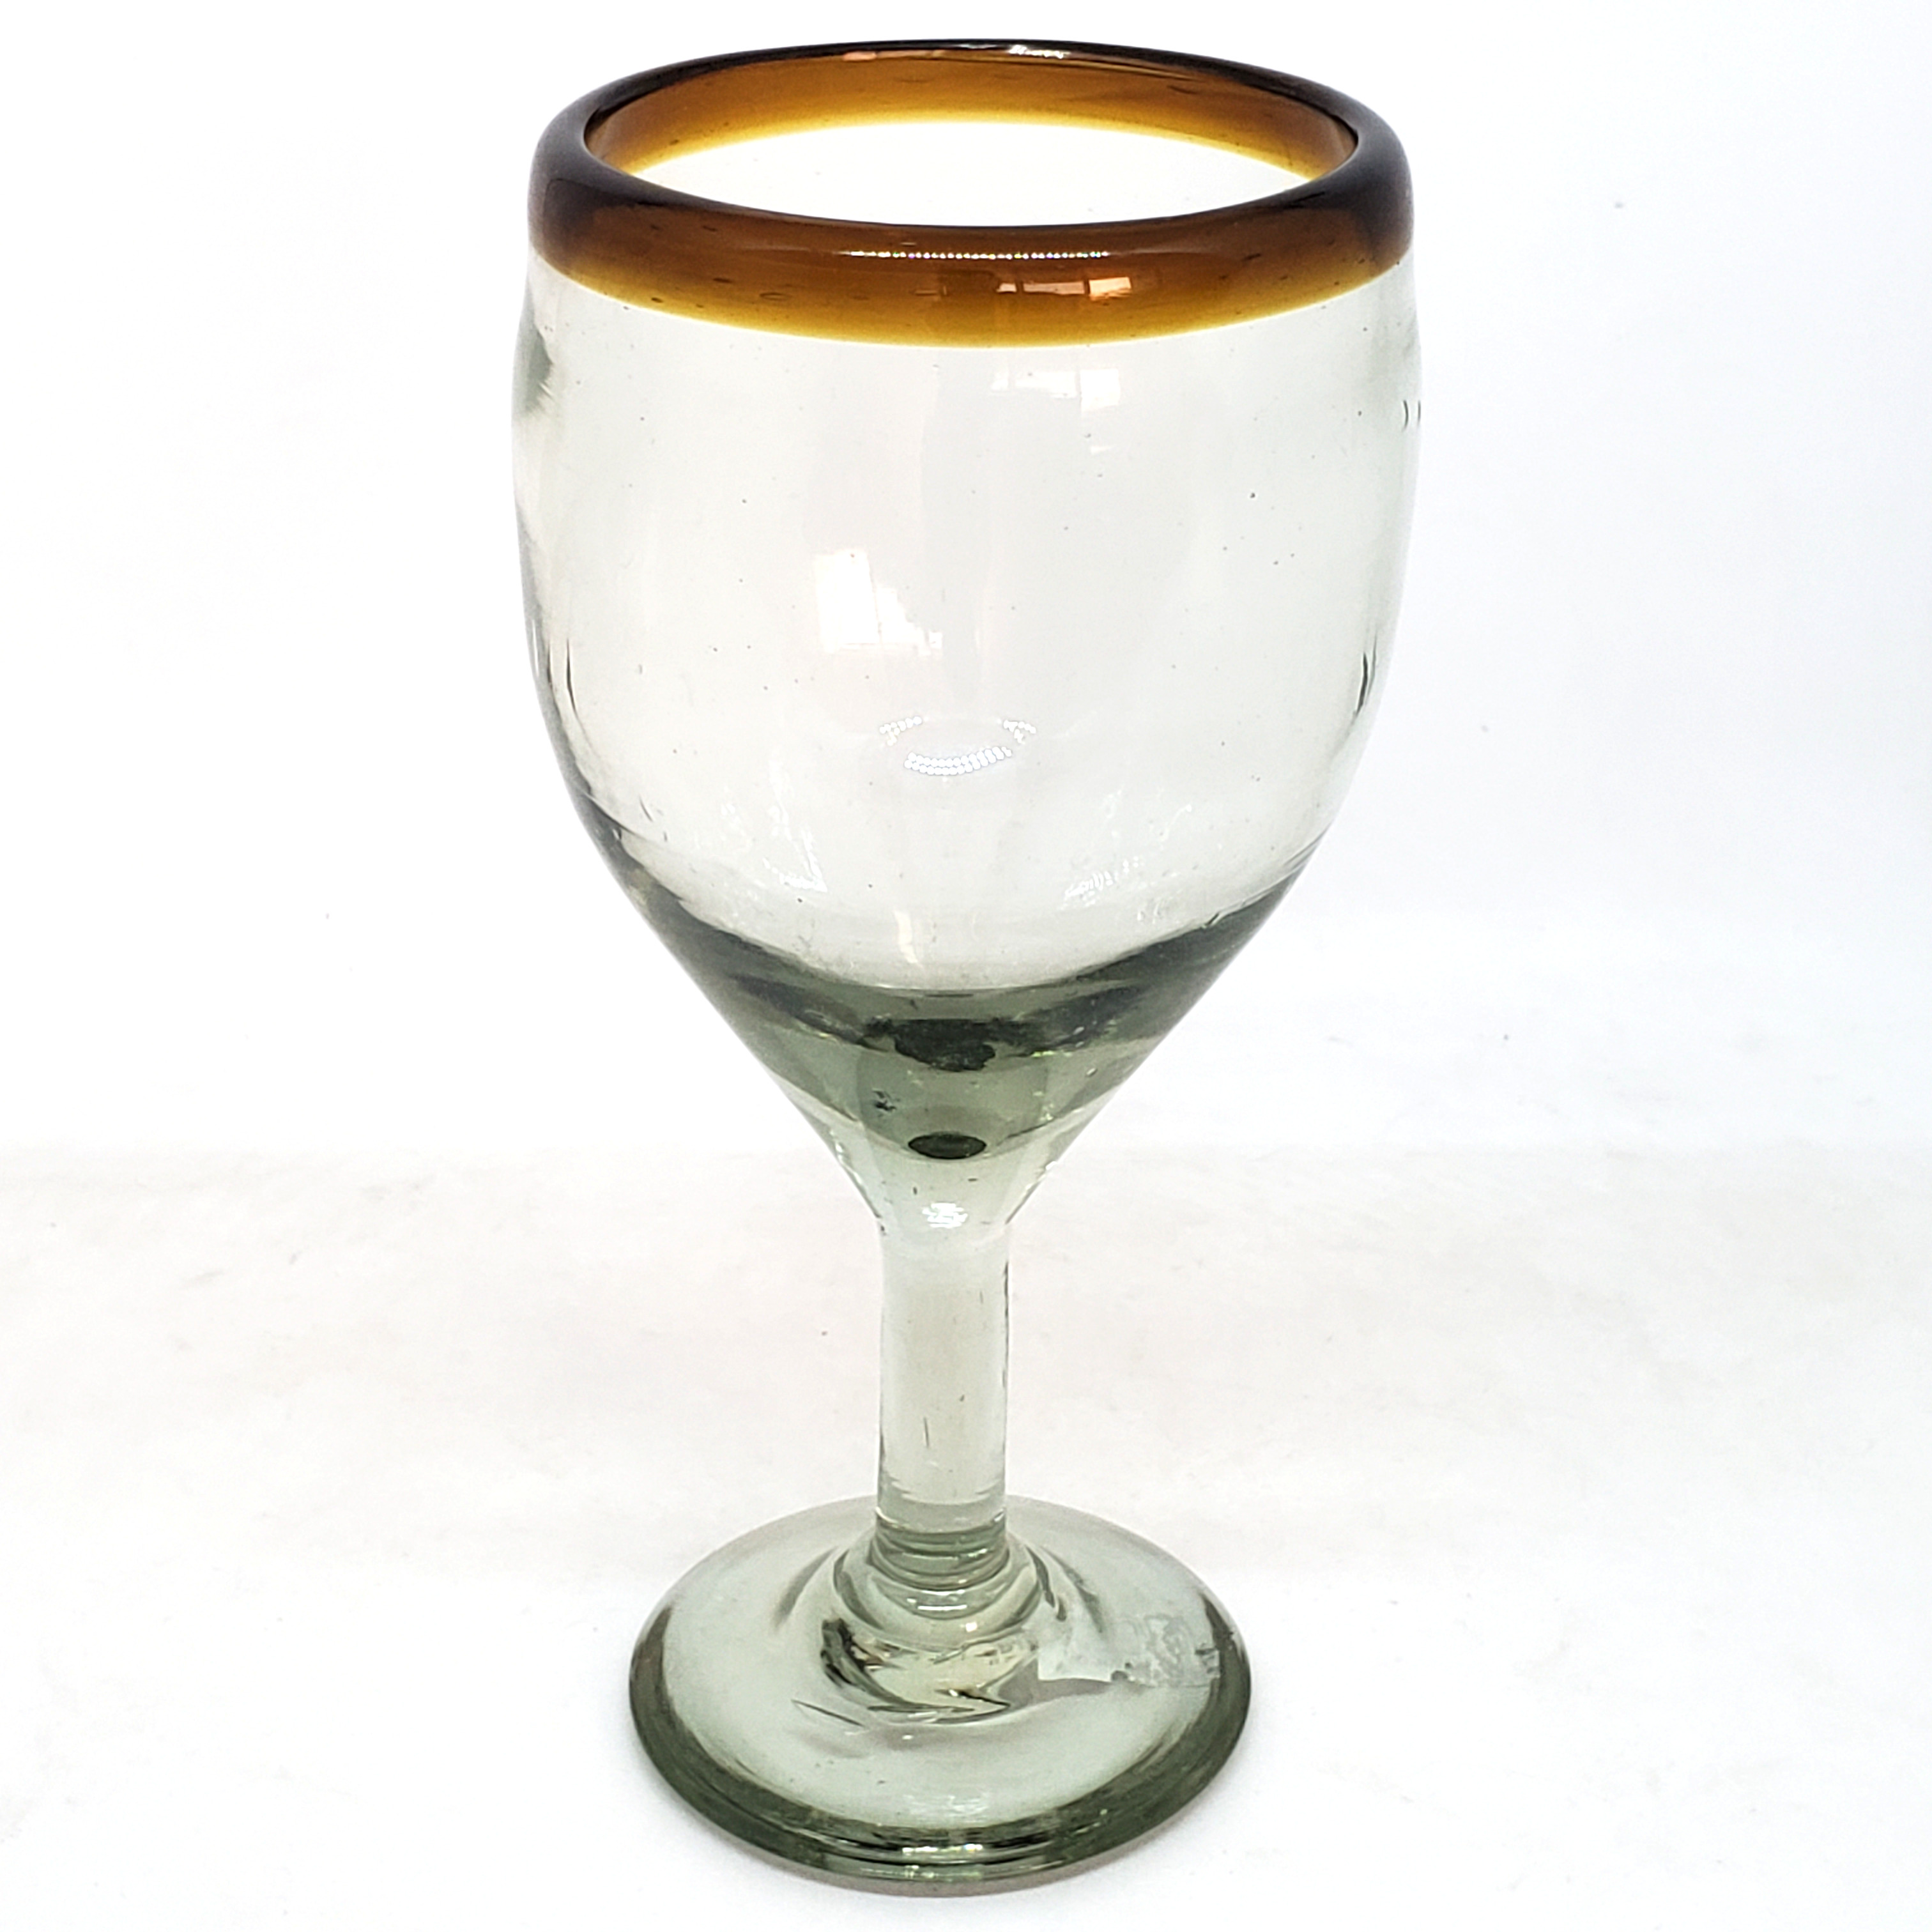 Amber Rim Glassware / Amber Rim 13 oz Wine Glasses (set of 6) / Capture the bouquet of fine red wine with these wine glasses bordered with a bright, amber rim.